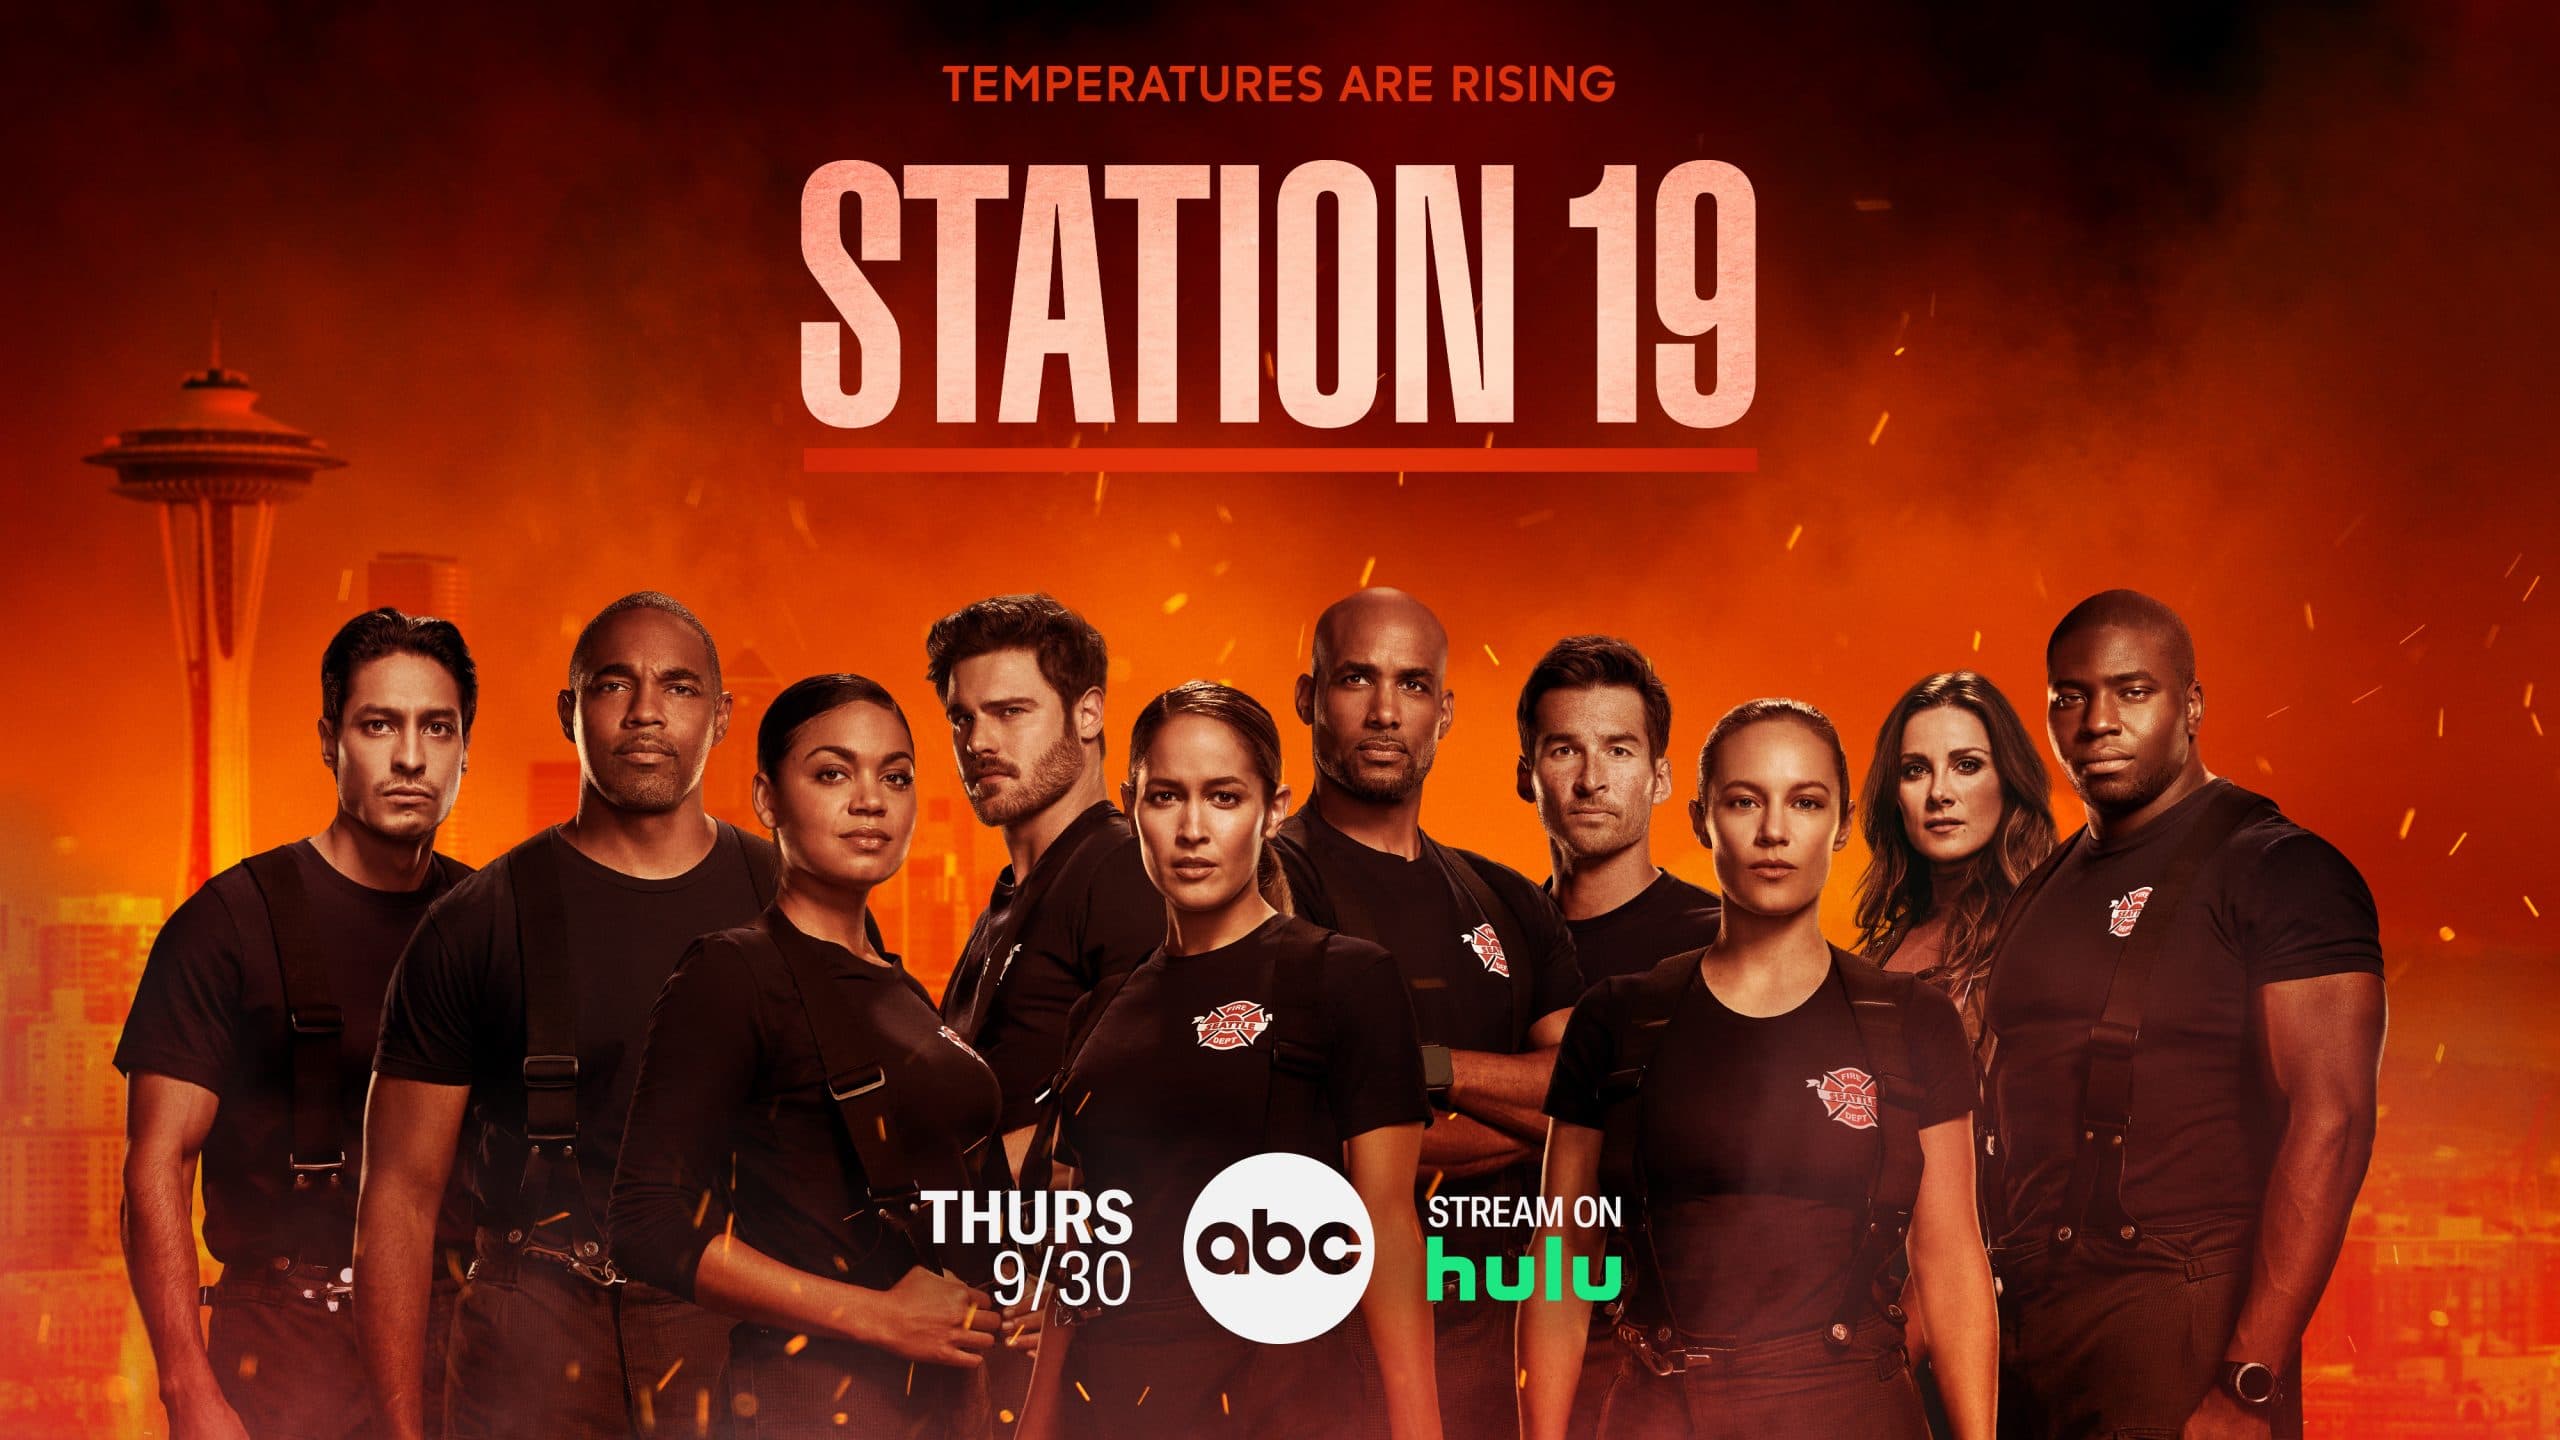 Station 19 feature